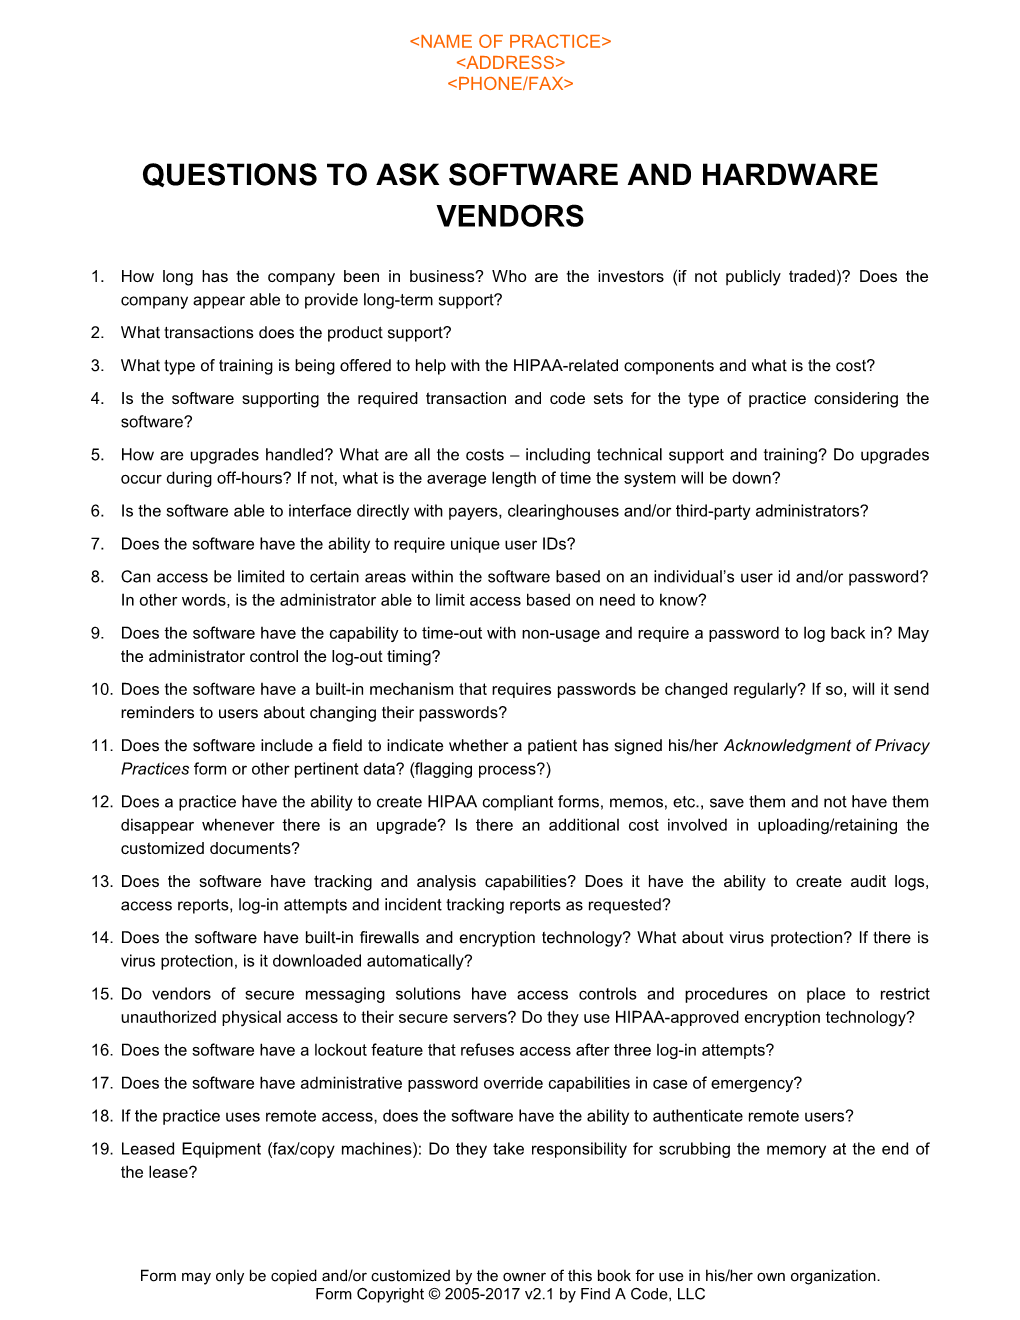 Questions to Ask Software and Hardware Vendors